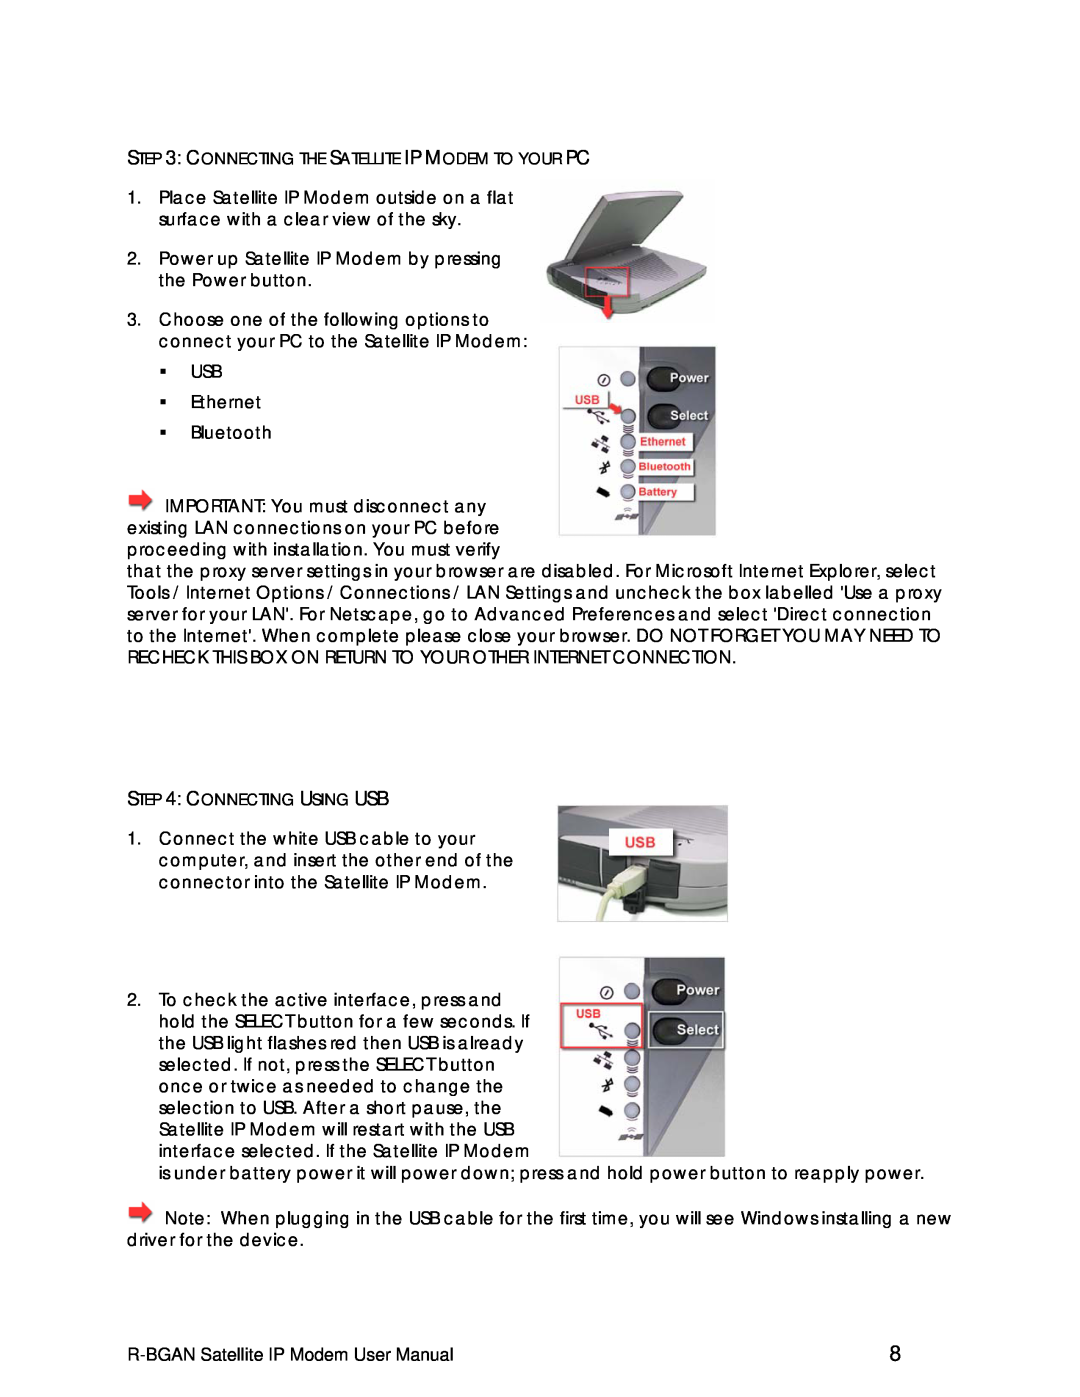 Hughes R-BGAN manual Connecting The Satellite Ip Modem To Your Pc, Connecting Using Usb 